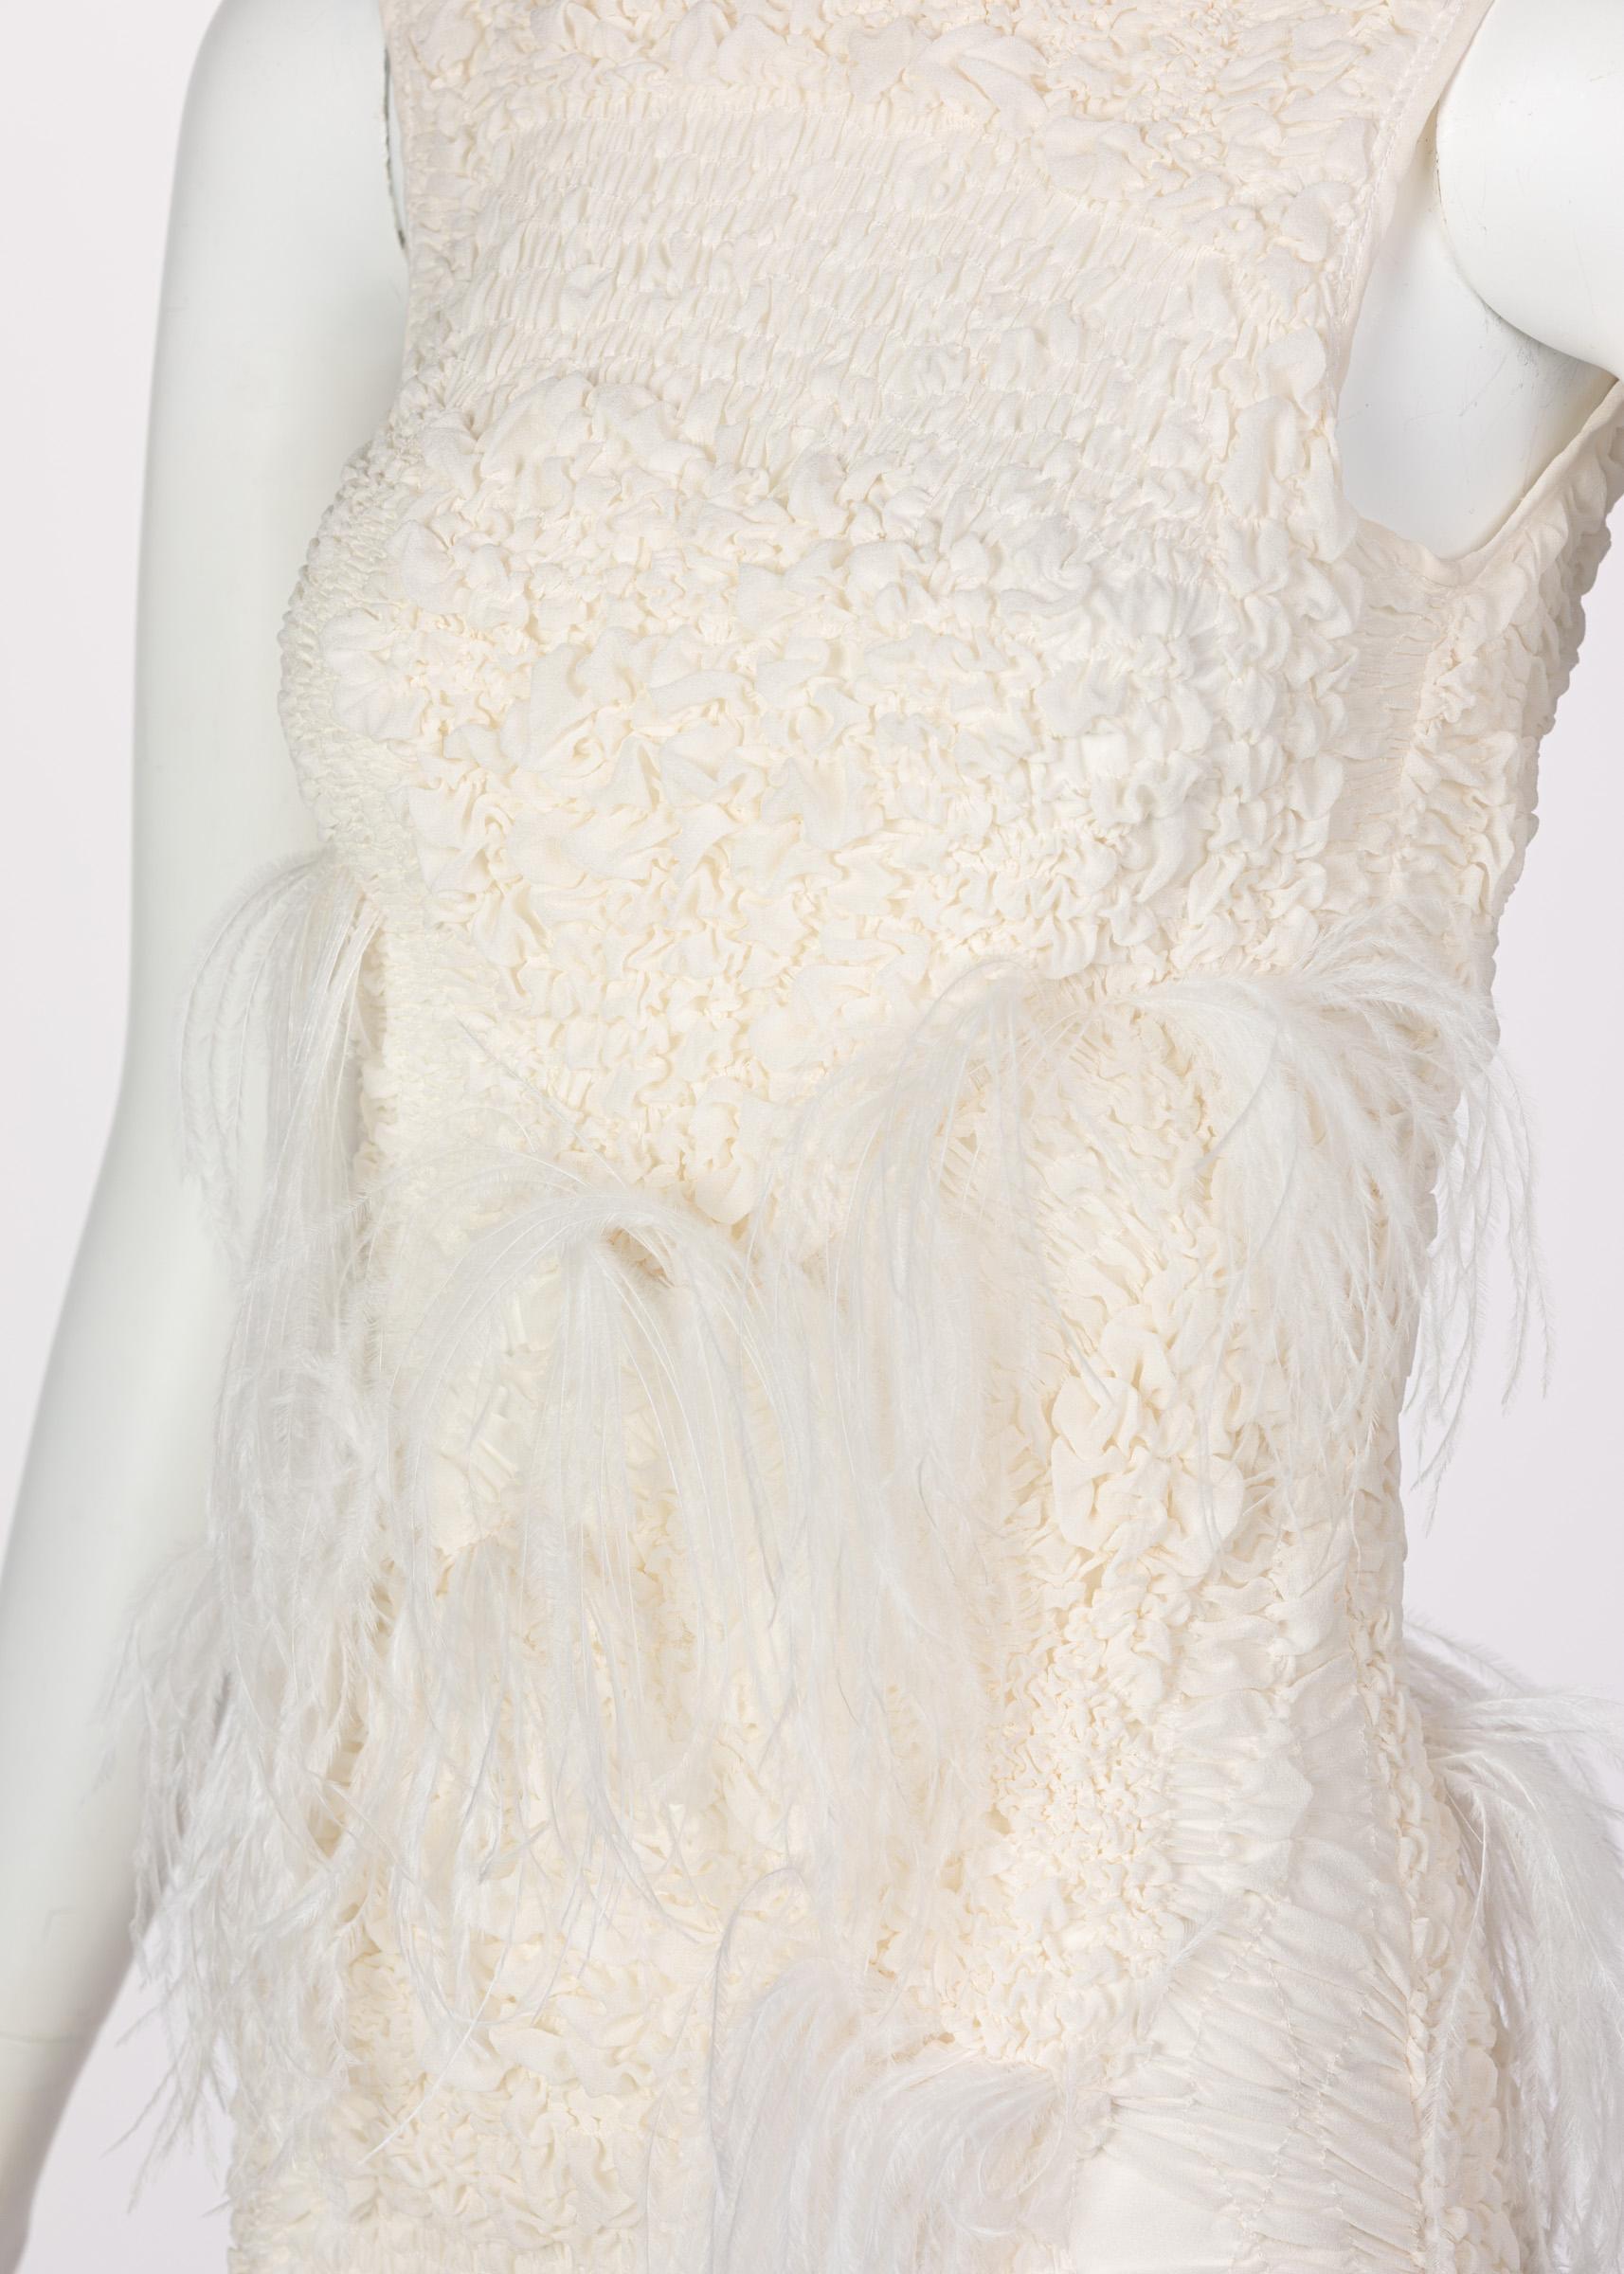 Nina Ricci Ivory Silk Feather Embellished Dress, Spring 2016 In Good Condition In Boca Raton, FL